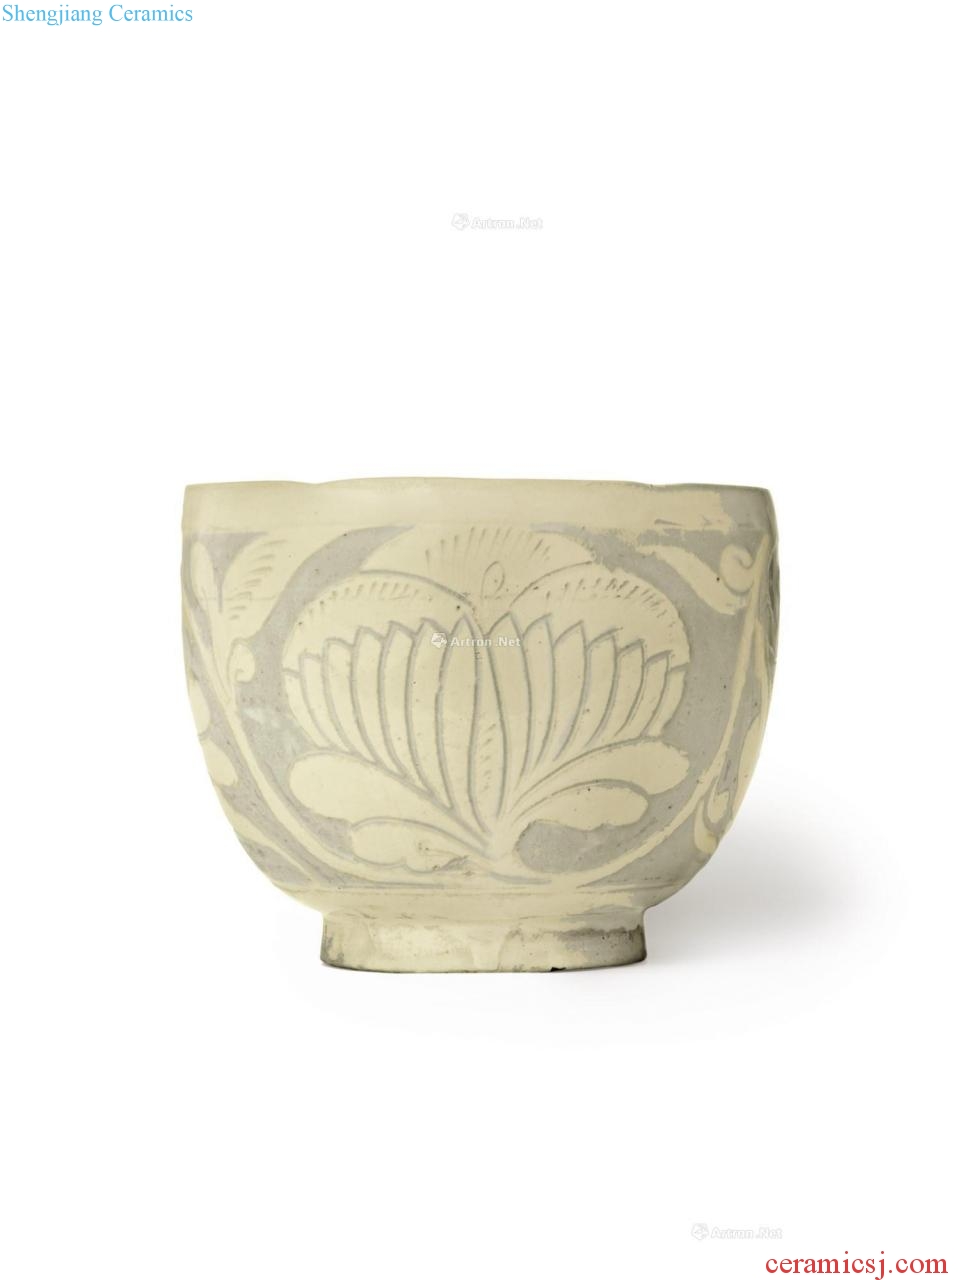 Stuck between northern song dynasty magnetic state kiln white flower pot